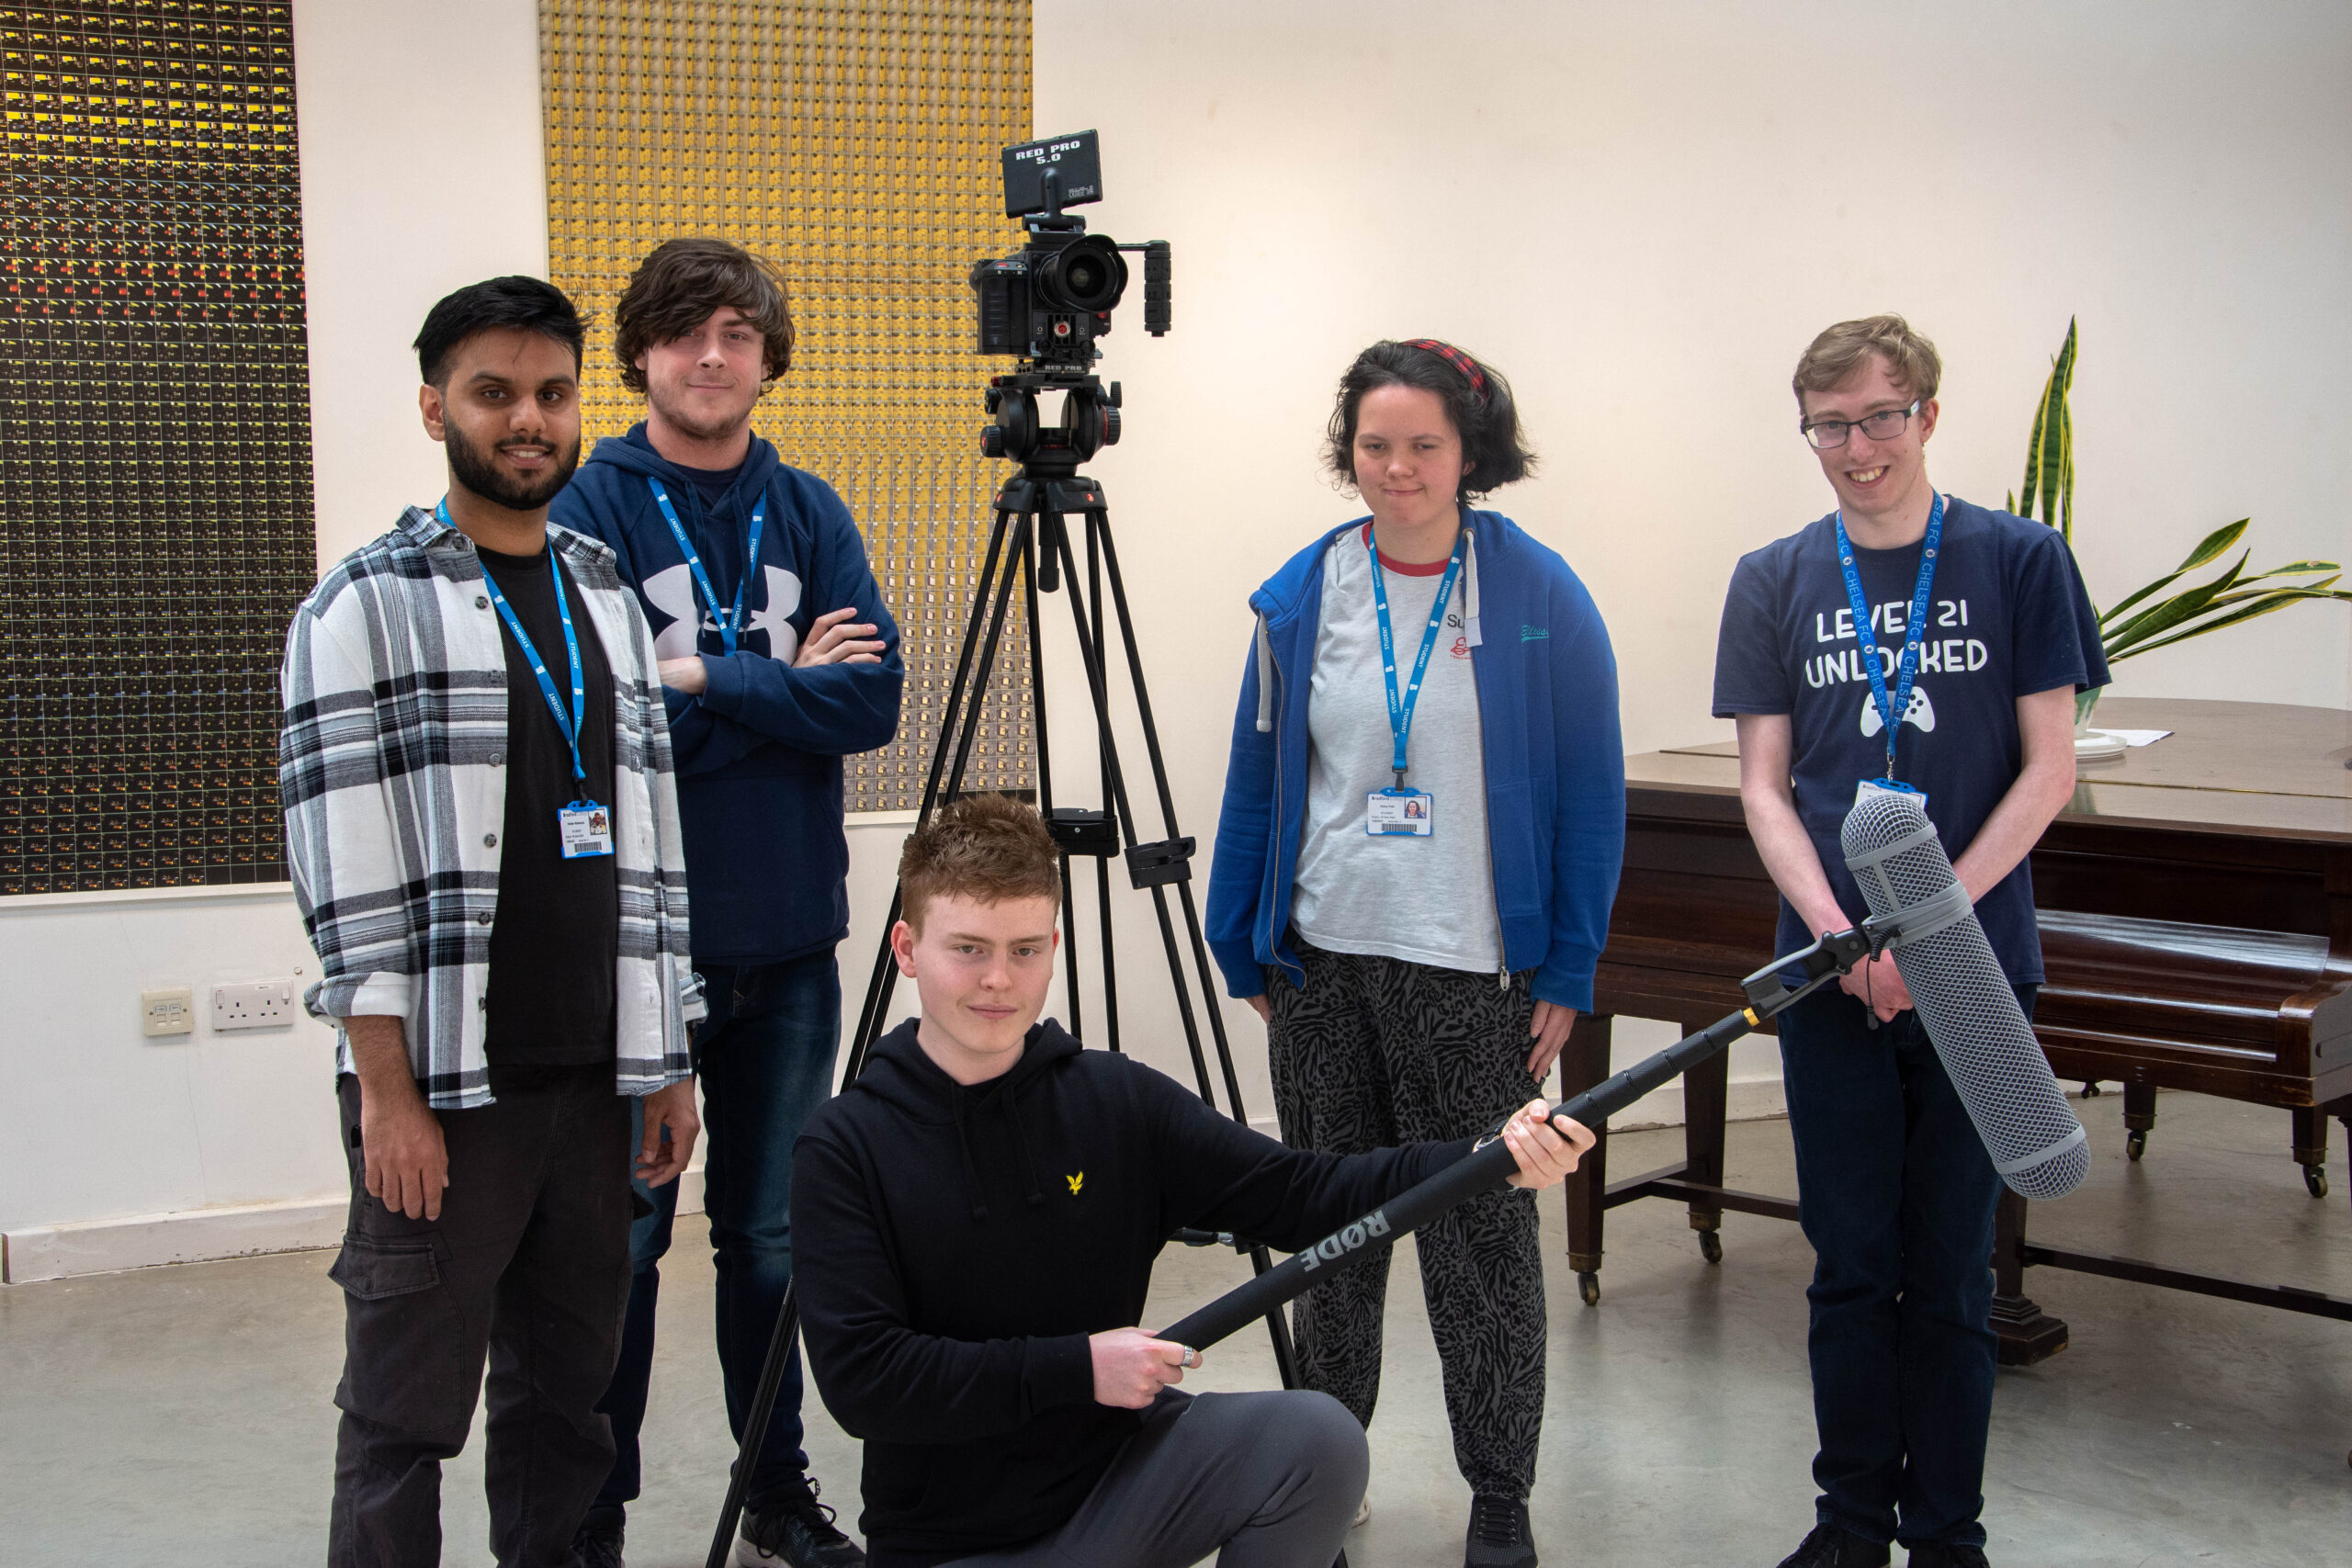 29987Behind the scenes with our film students at the end of year Film Showcase